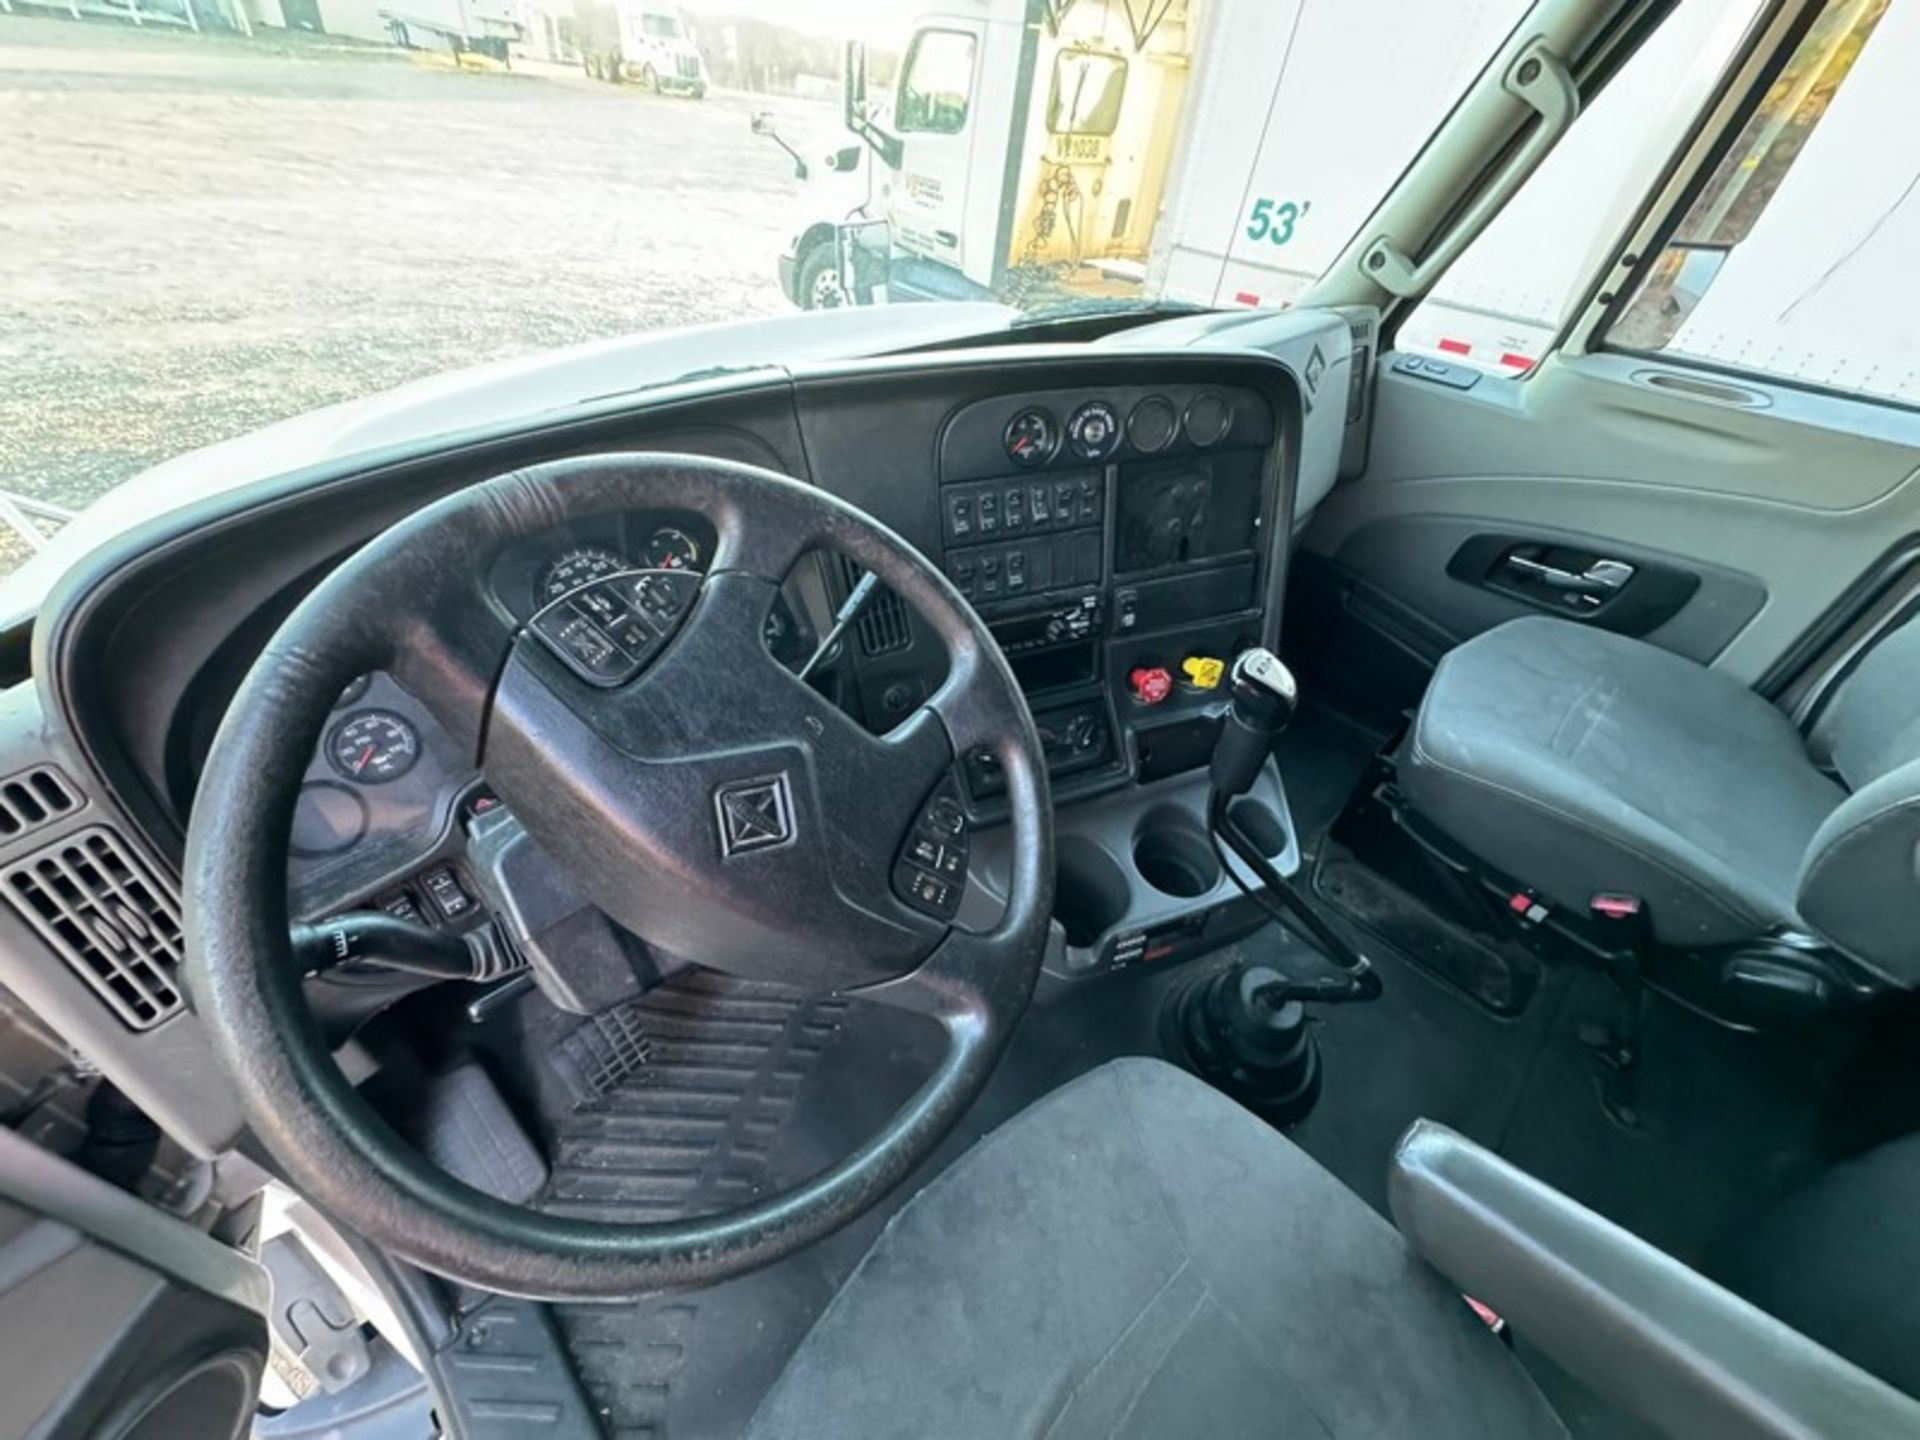 2012 International Truck Tractor, VIN #: 3HSDJAPPR0GN002705, with Sleep Cab, Miles: 684, 121(Service - Image 15 of 29